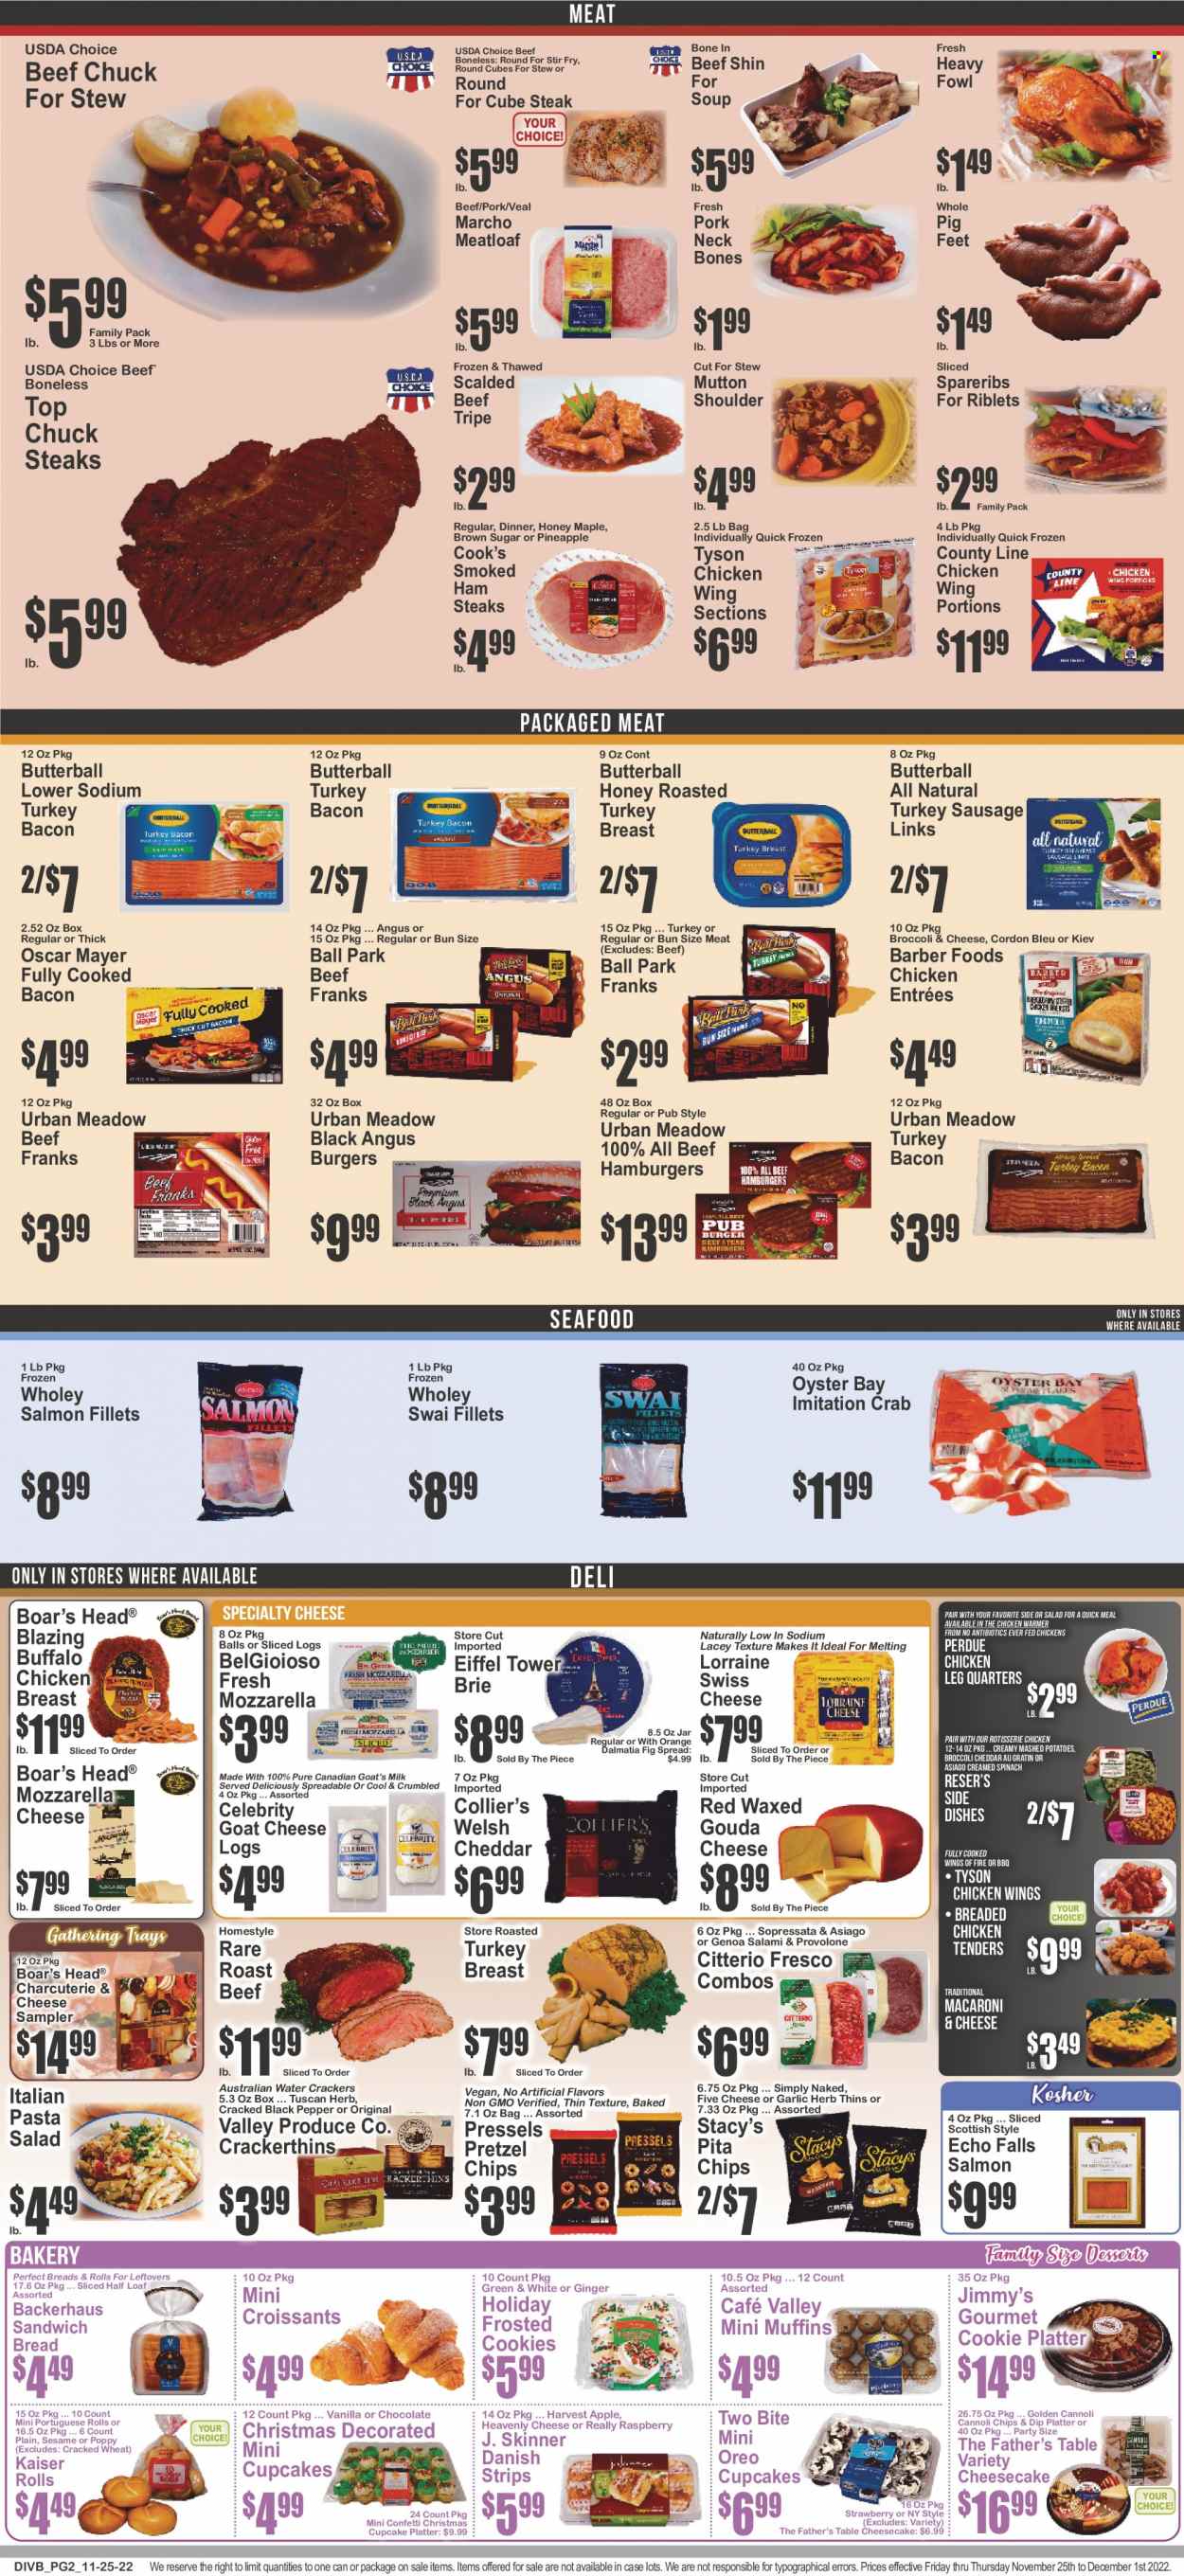 thumbnail - Food Universe Flyer - 11/25/2022 - 12/01/2022 - Sales products - bread, pretzels, croissant, Father's Table, cupcake, cheesecake, muffin, broccoli, garlic, ginger, oranges, salmon, salmon fillet, oysters, seafood, crab, swai fillet, macaroni & cheese, mashed potatoes, chicken roast, soup, hamburger, pasta, fried chicken, meatloaf, Perdue®, bacon, Butterball, salami, turkey bacon, ham, smoked ham, Cook's, Oscar Mayer, sausage, pasta salad, ham steaks, asiago, goat cheese, gouda, mozzarella, swiss cheese, brie, Provolone, Oreo, milk, dip, chicken wings, cordon bleu, strips, cookies, crackers, Thins, pita chips, cane sugar, Skinner Pasta, black pepper, honey, chicken legs, beef meat, beef tripe, steak, roast beef, pork spare ribs, mutton meat. Page 3.